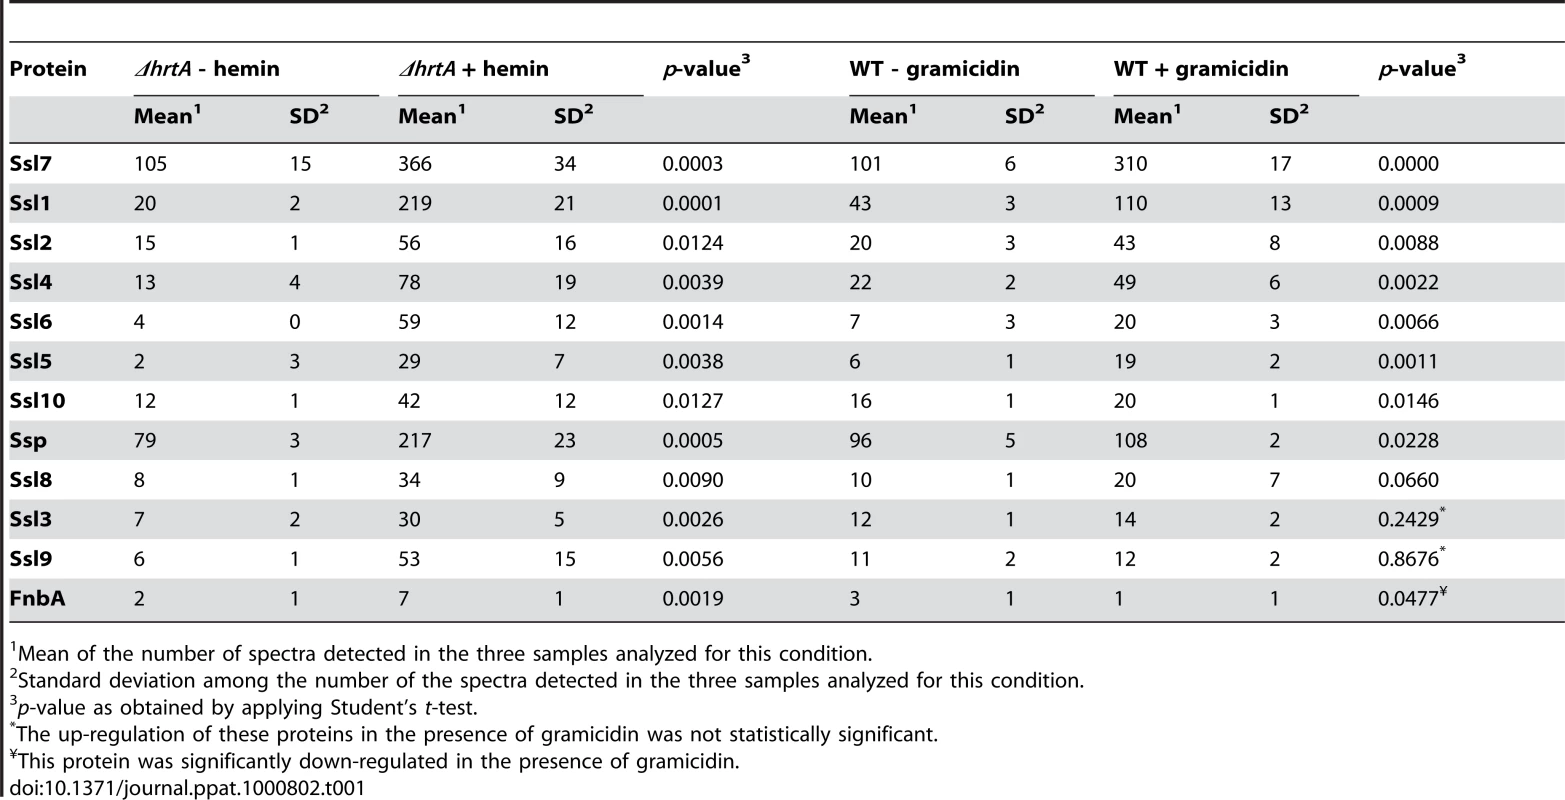 Secreted proteins up-regulated in (<i>ΔhrtA</i> + hemin) and (WT + gramicidin).